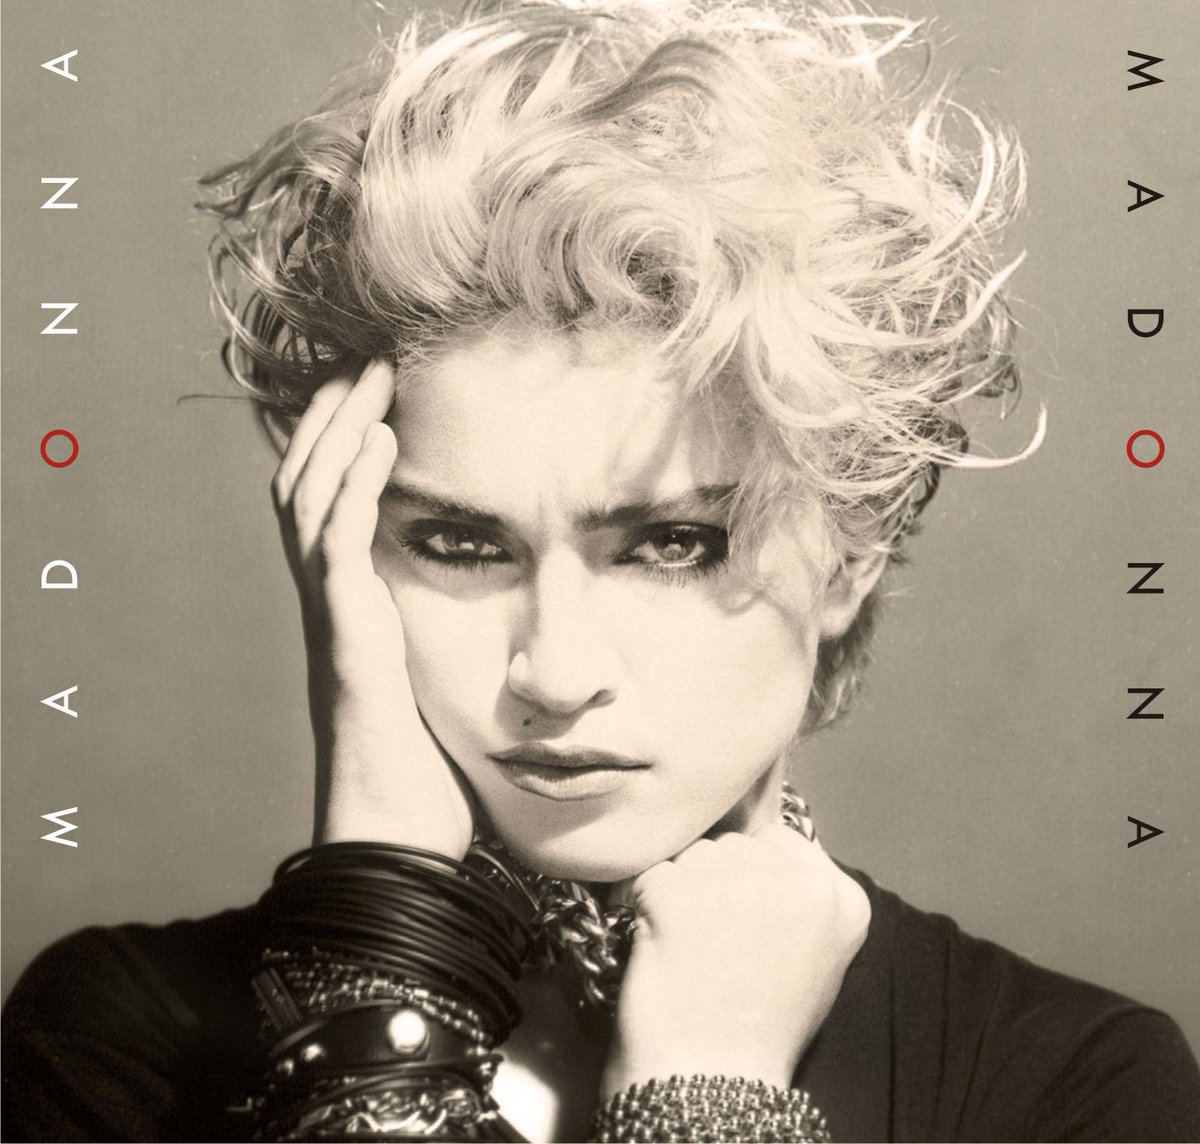 Madonna (1983):You're not really a Madonna fan you just like 80s dance pop and post disco bops